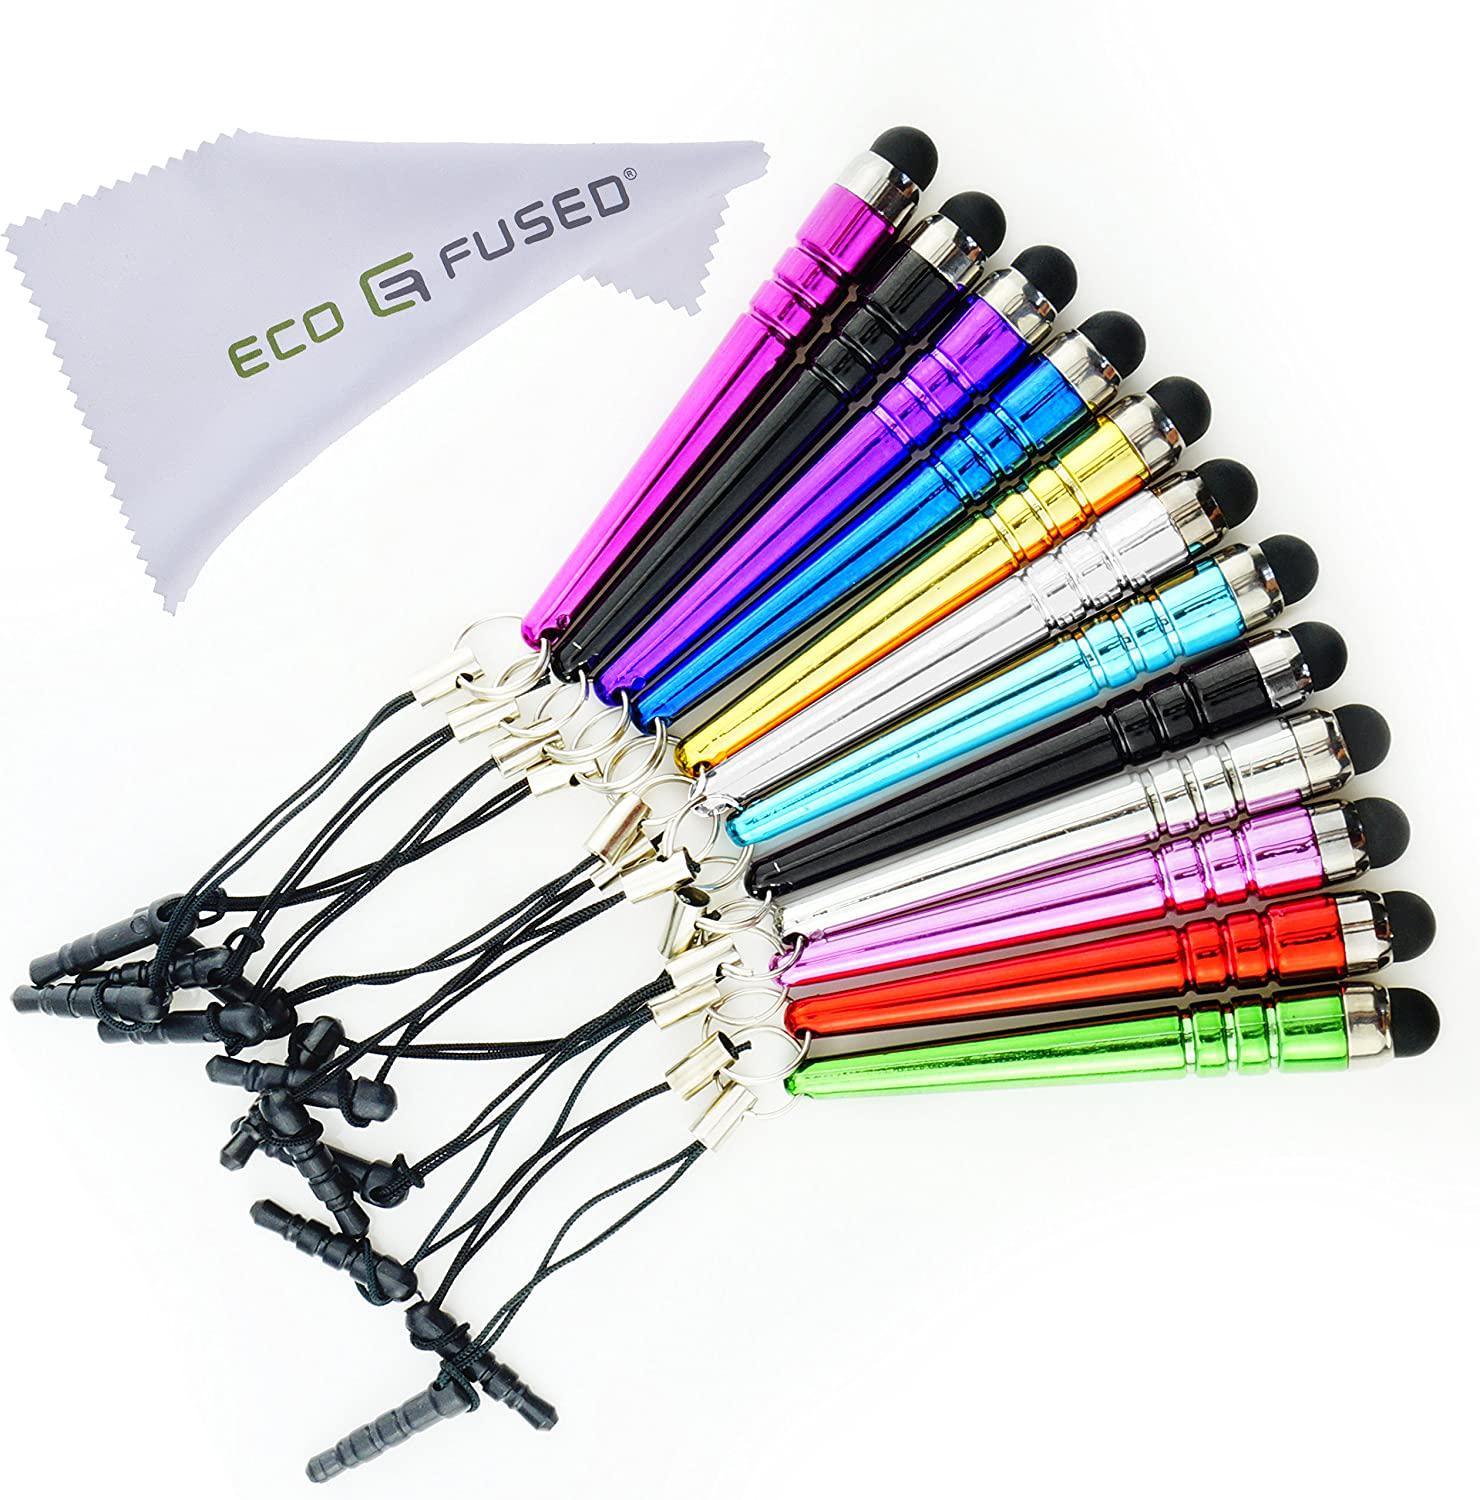 Eco-Fused, Eco-Fused Universal Stylus Pen Bundle 12 Pack with 3.5Mm Jack Connector Microfiber Cleaning Cloth Red, Purple, Hot Pink, Light Blue, Blue, Green, Gold, Silver,Light Pink, Orange, Black